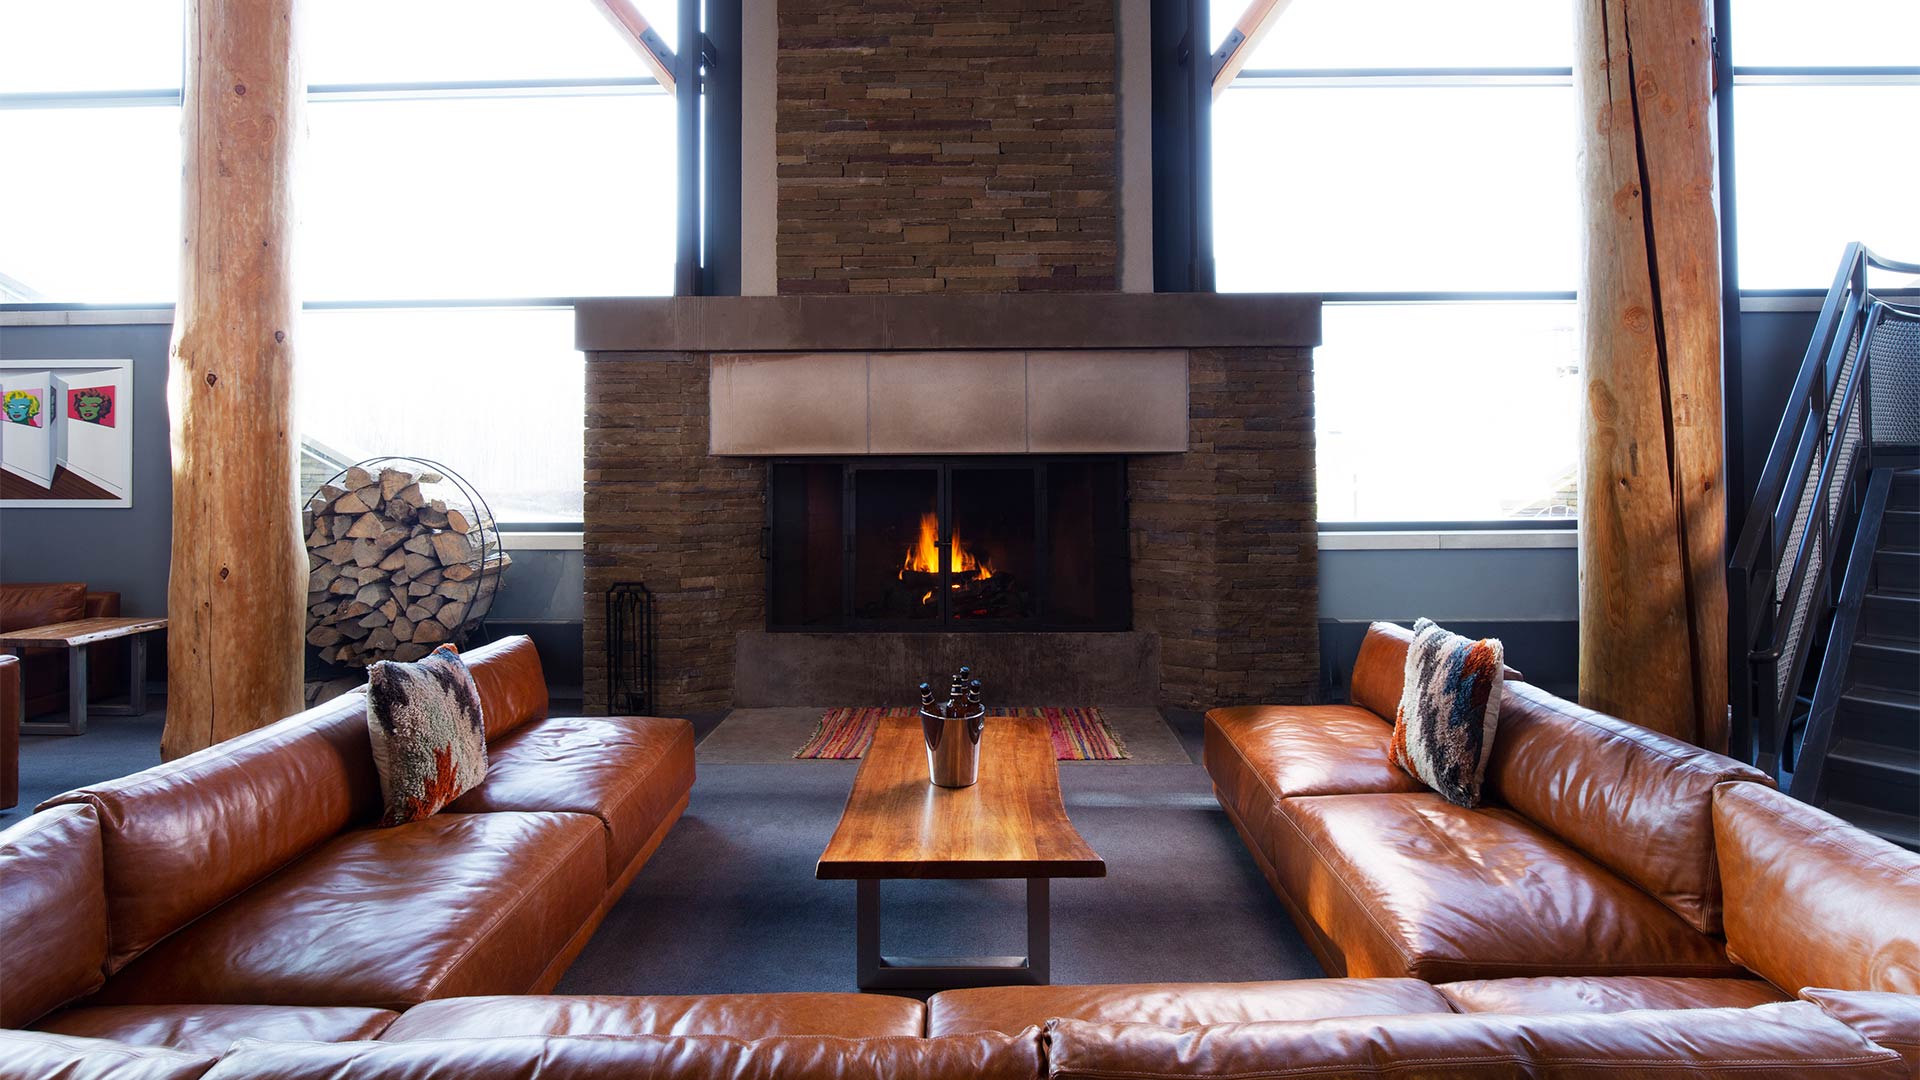 Brown leather seats in front of a fireplace.